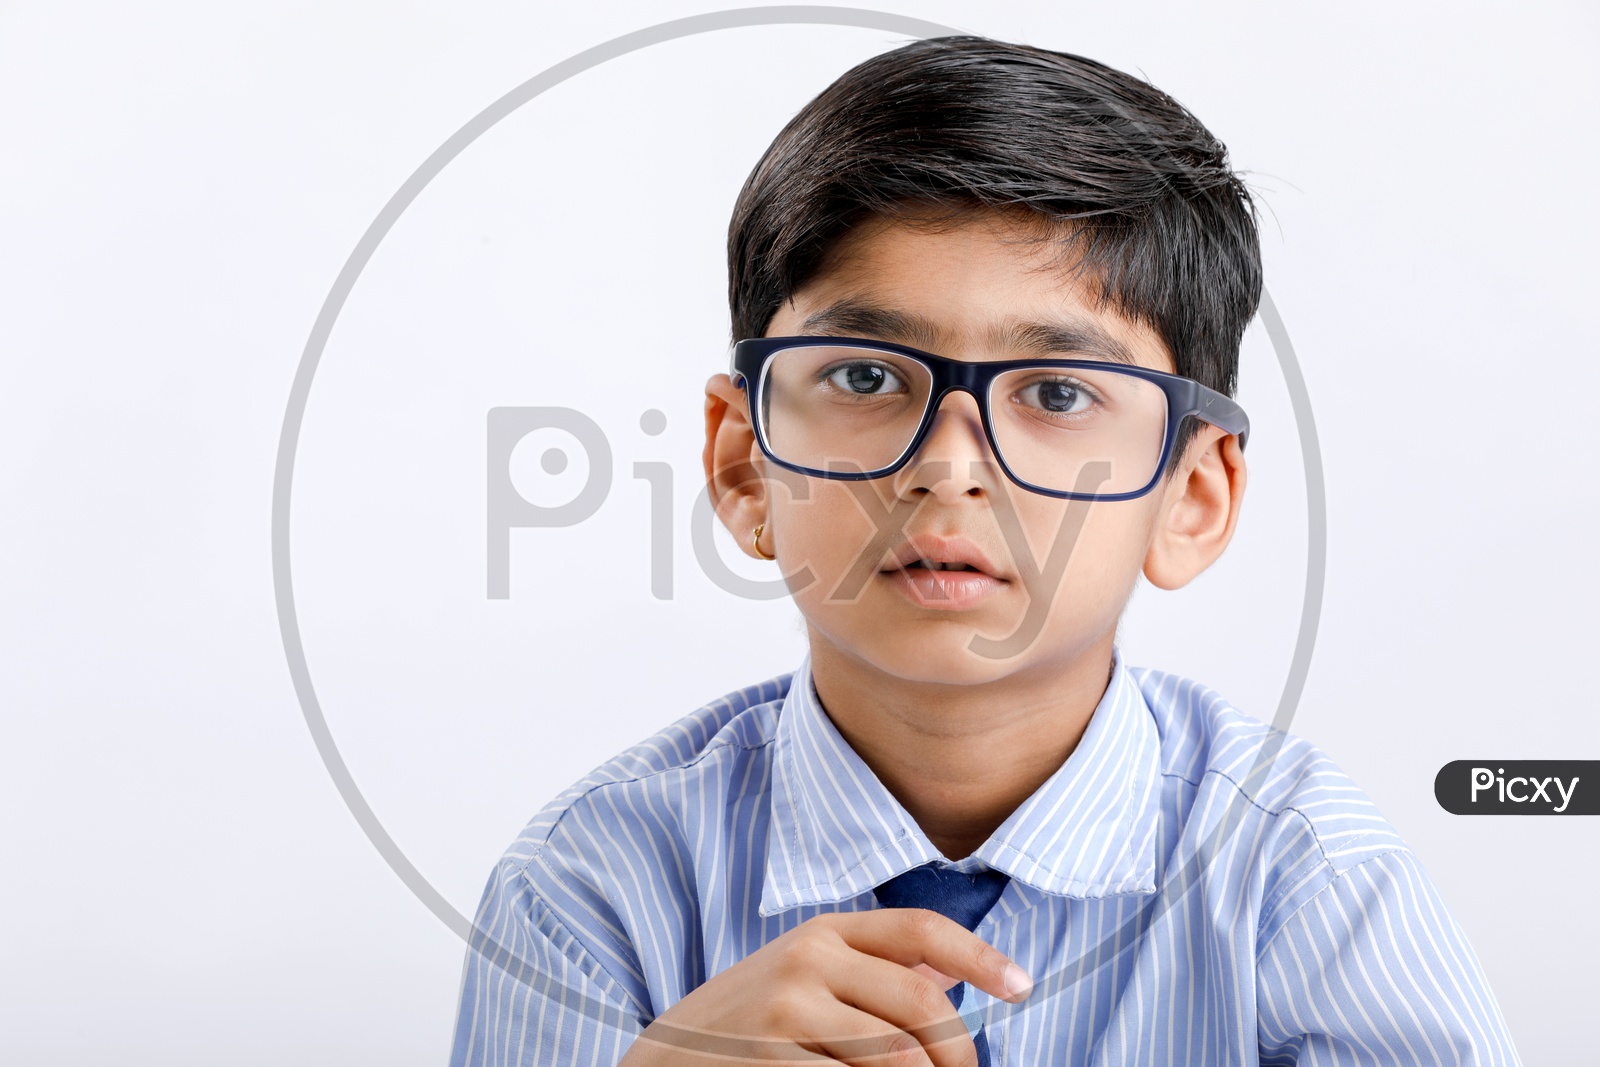 Indian or Asian School Kid Or Boy Wearing Uniform  And Posing With Spectacles  Over an Isolated White Background